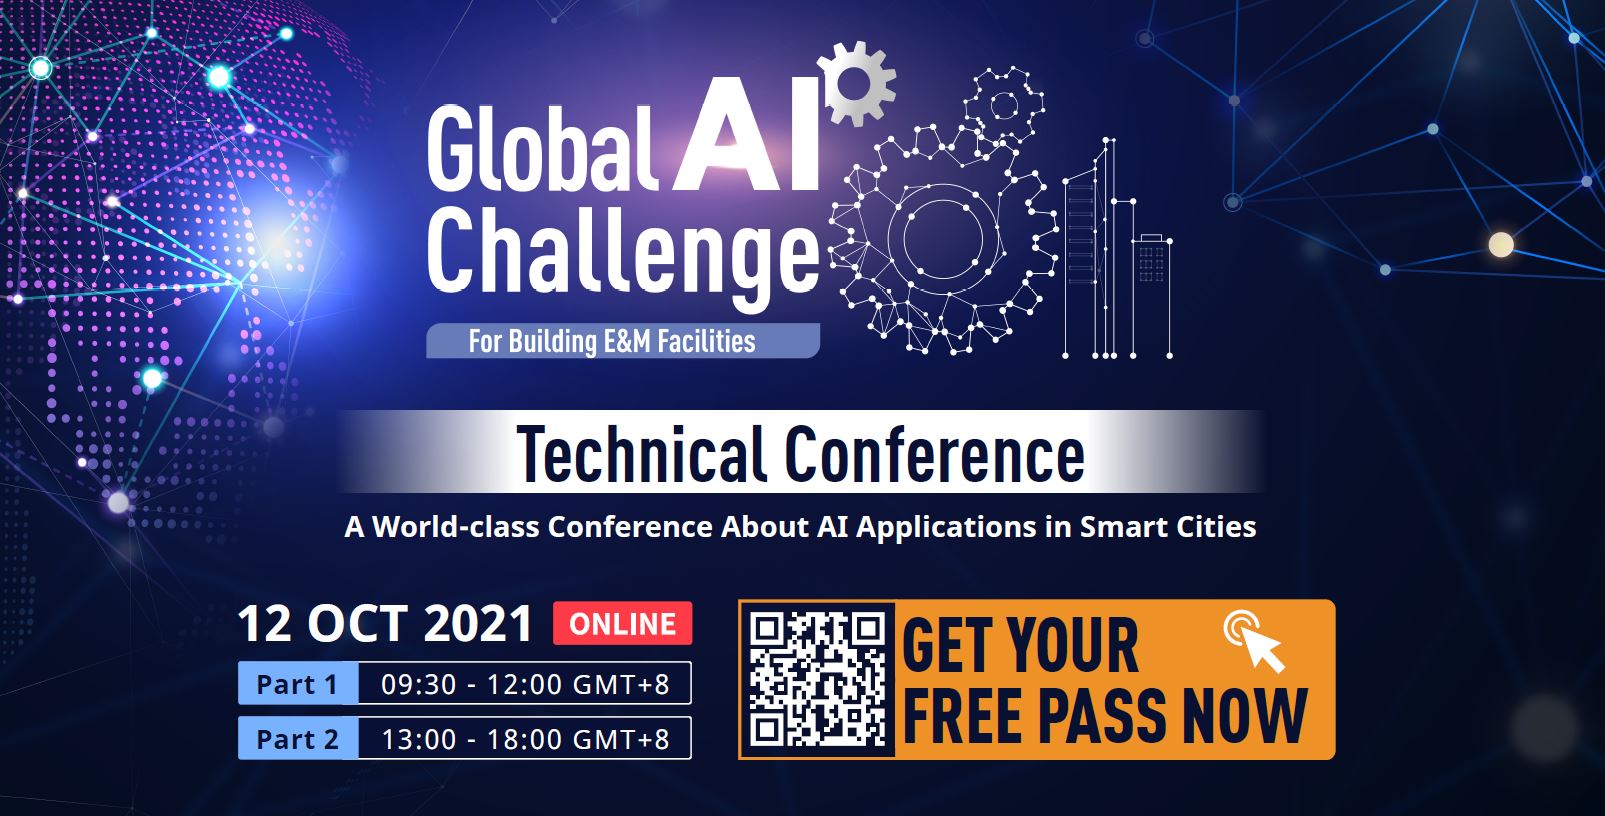 Global AI Challenge for Building E&M Facilities – Technical Conference